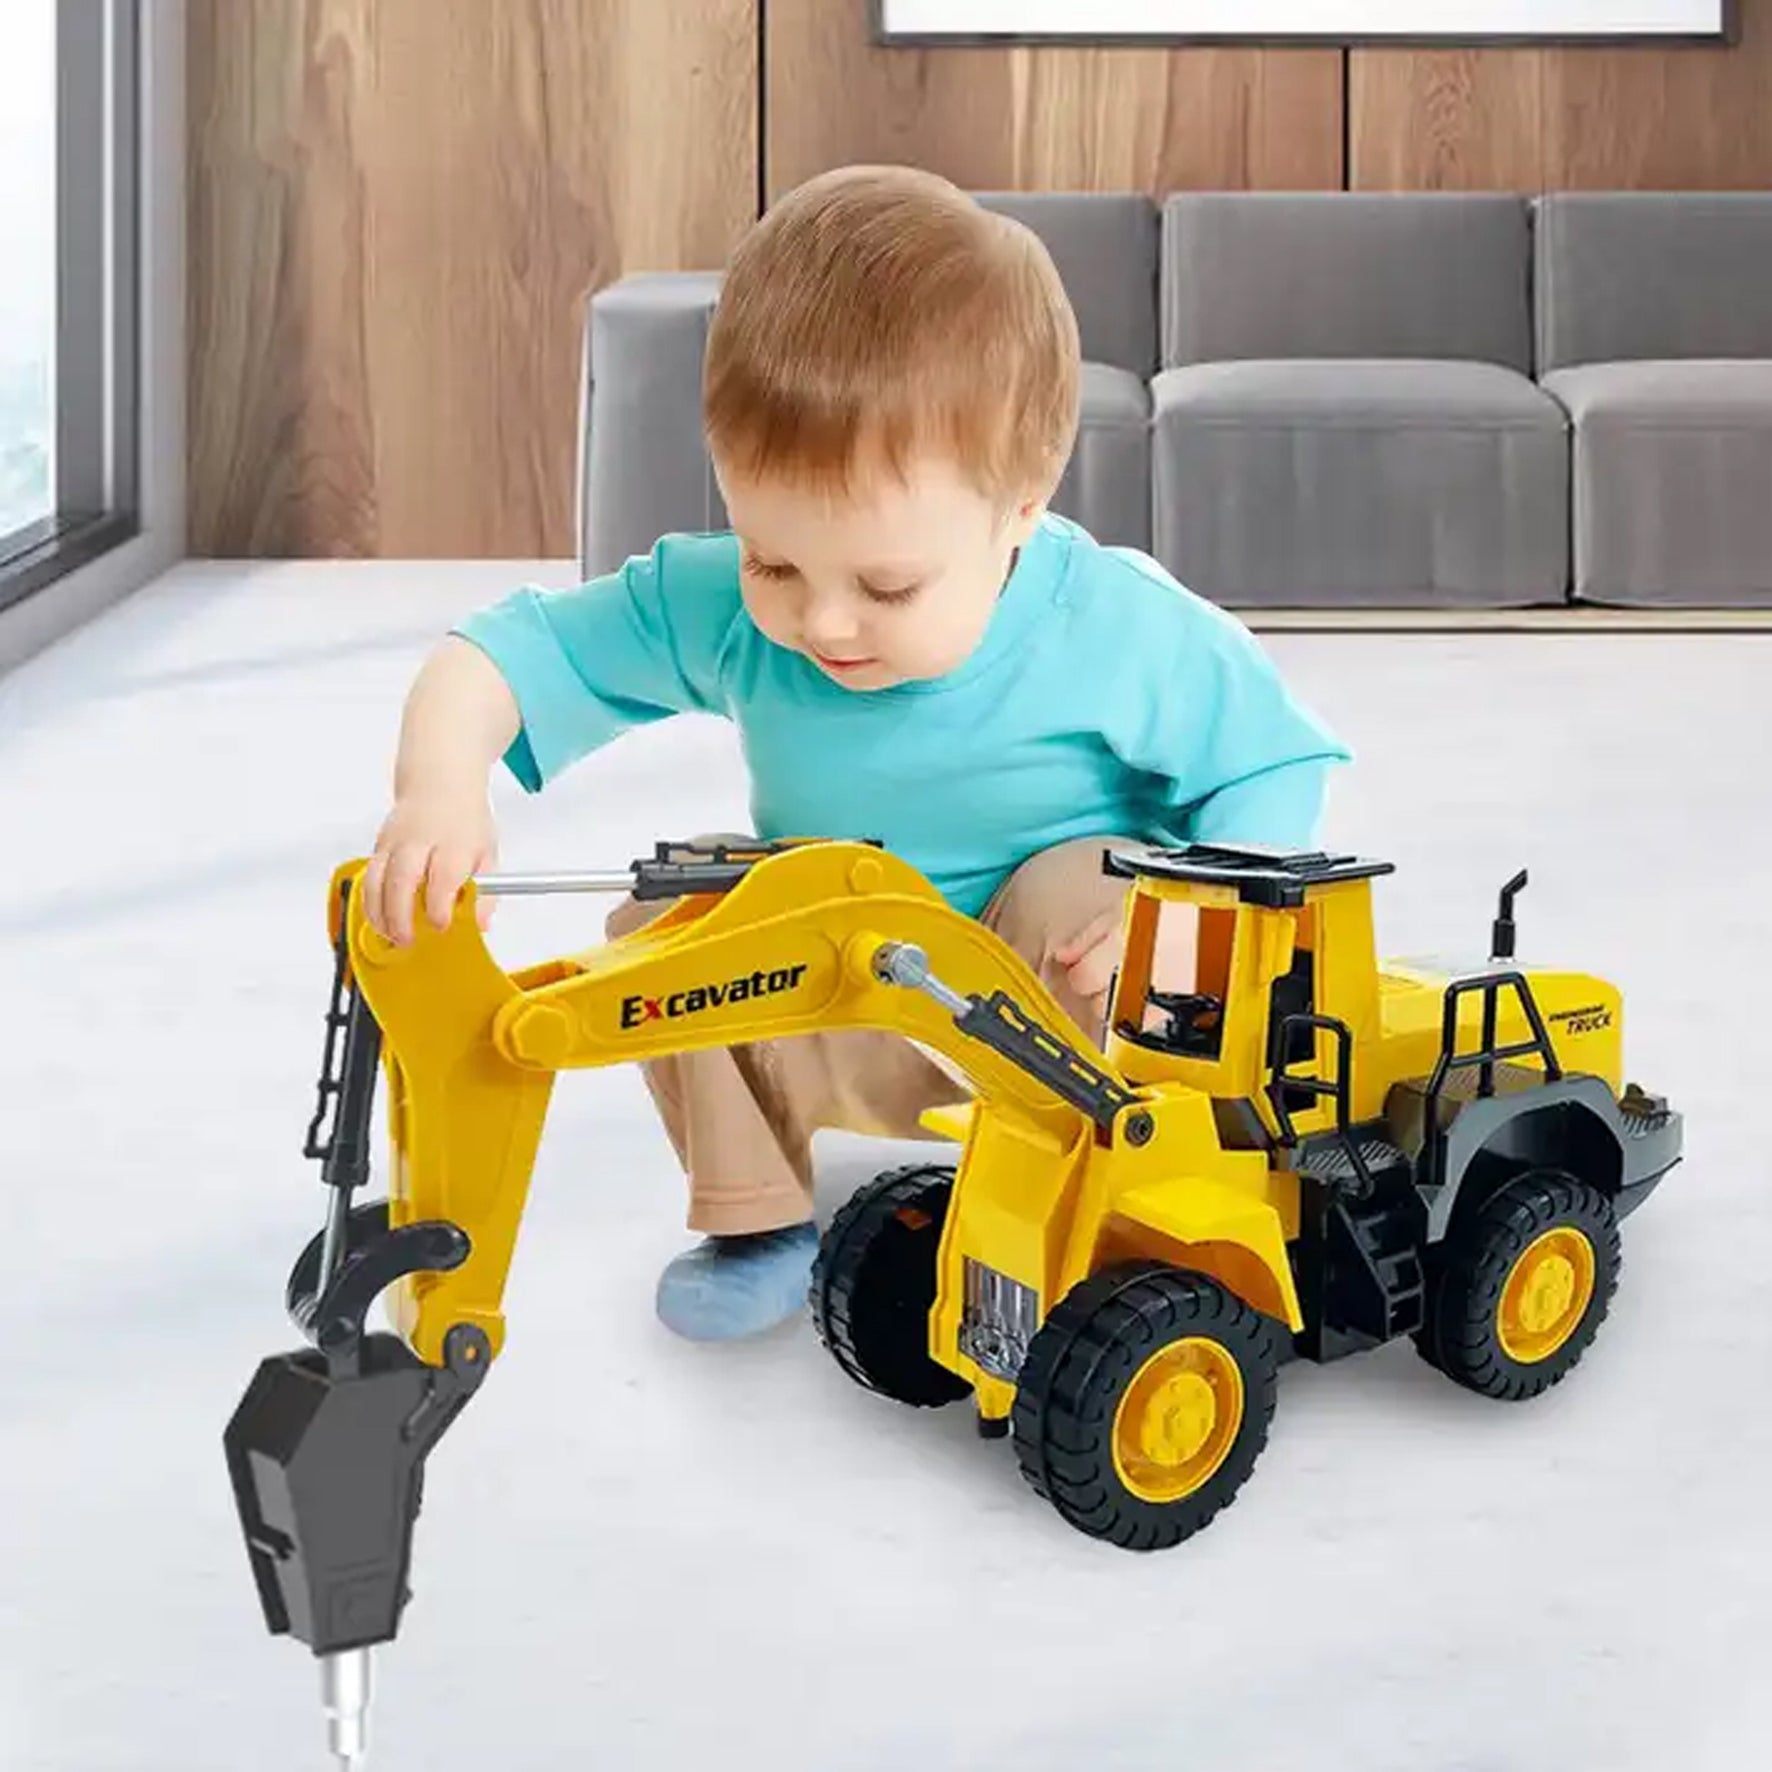 Highland Battery Operated JCB Style Construction Truck EXCAVATOR with Real Functions Bump and Go